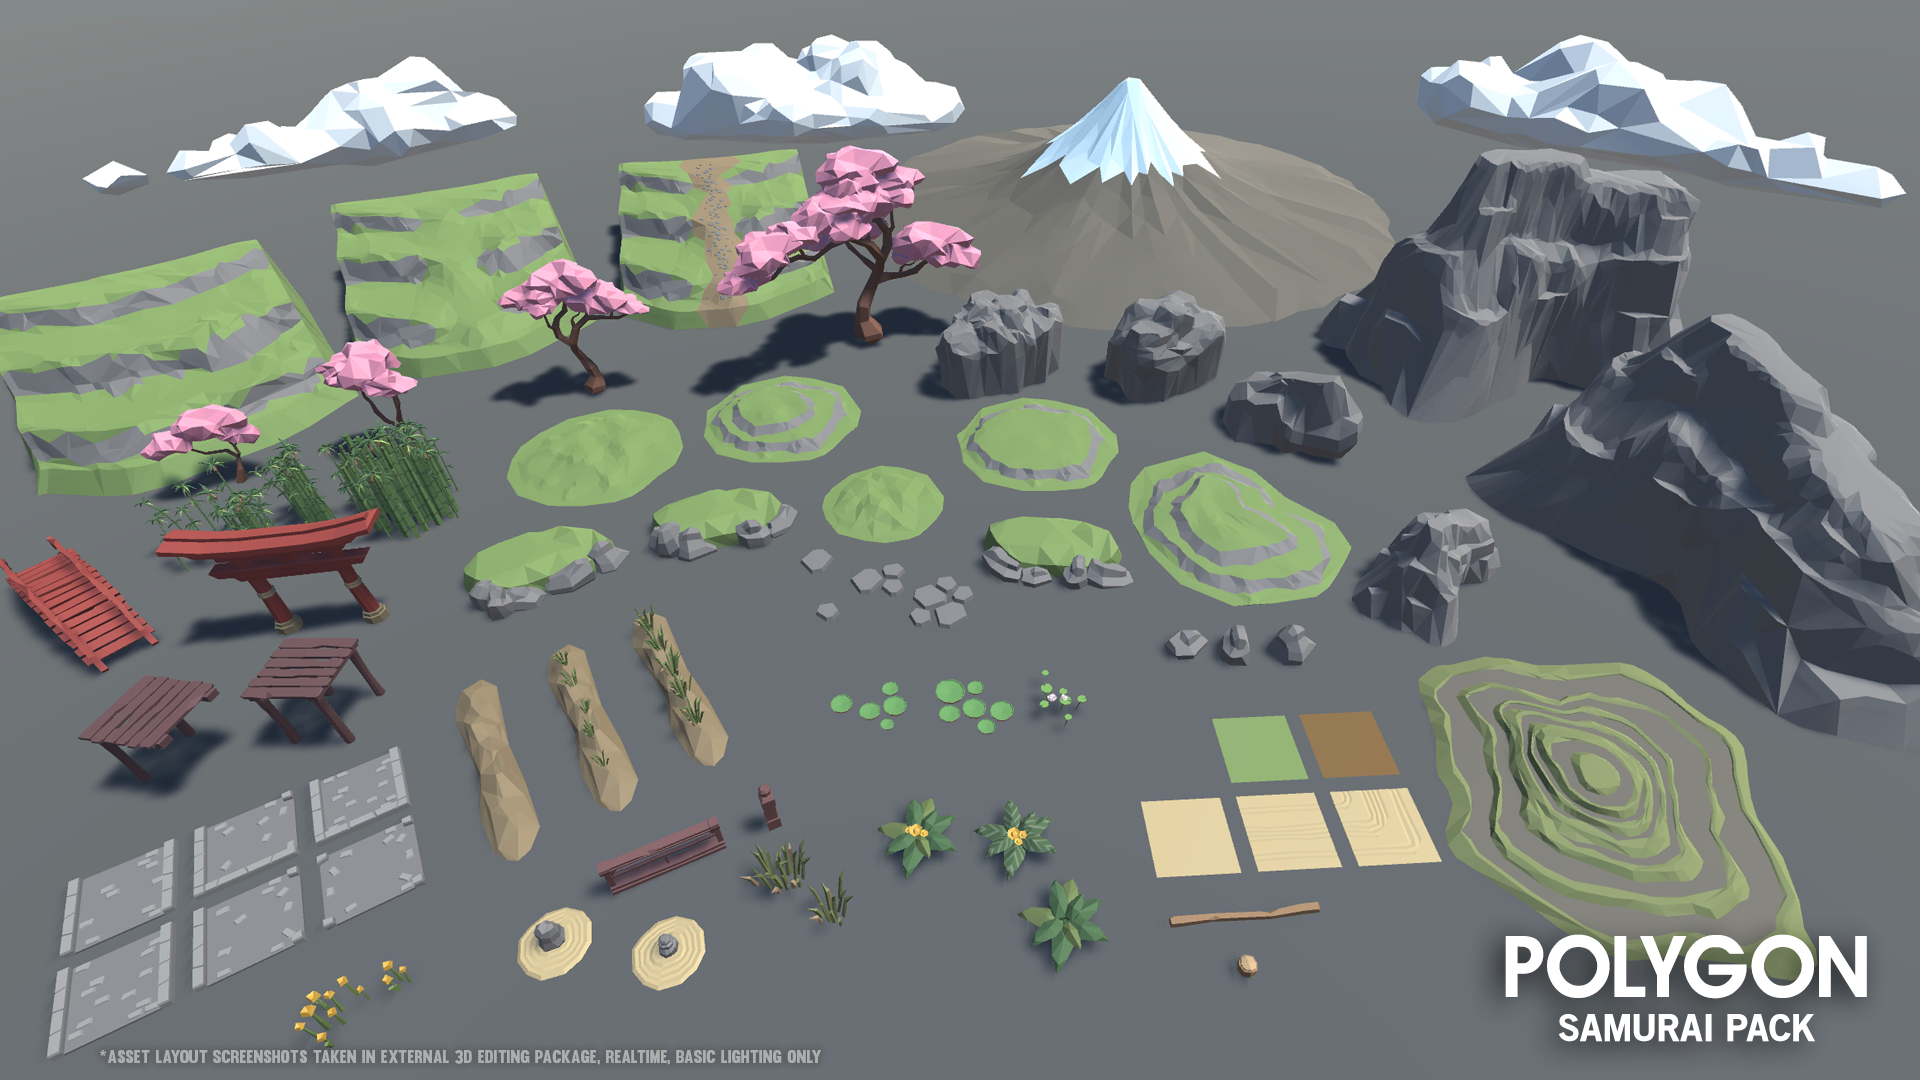 Samurai environment assets for low poly game development including mountains, trees, rice fields, shrines and grass